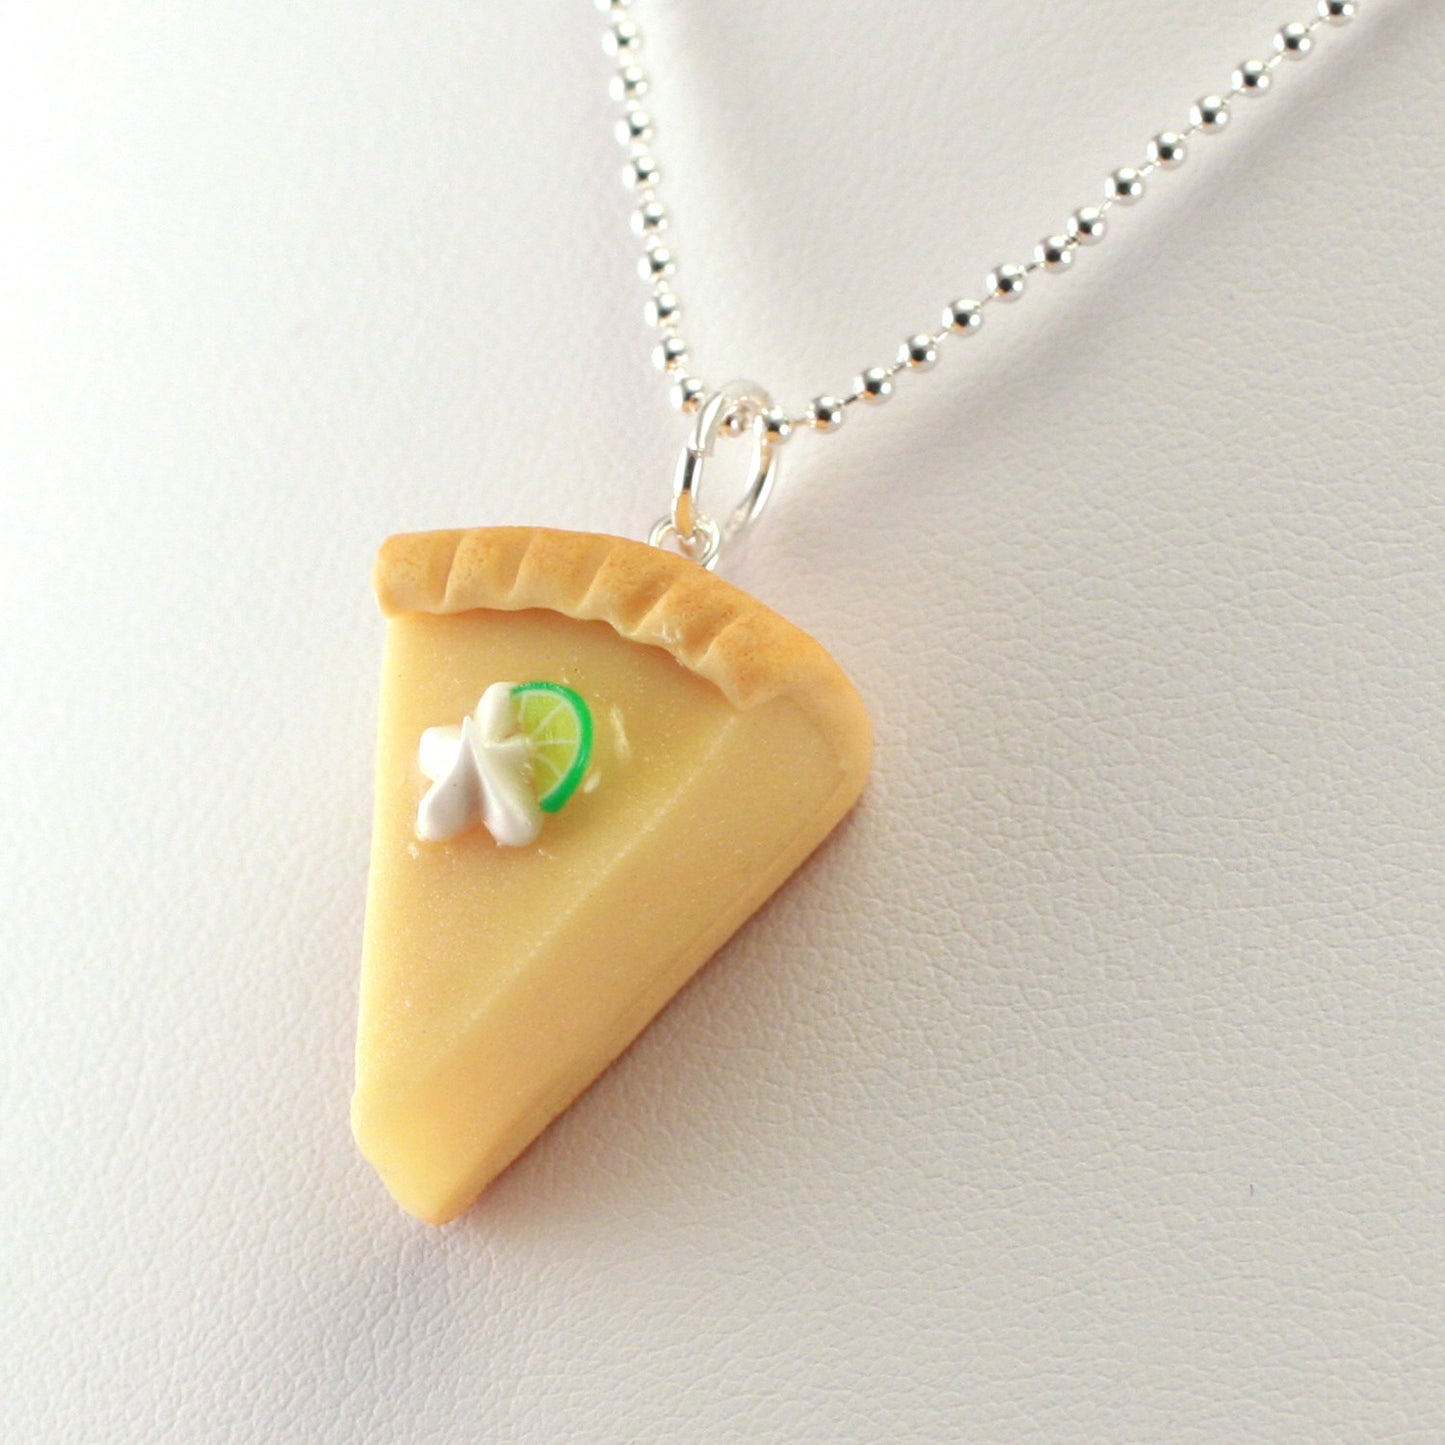 Scented Key Lime Pie Necklace - Tiny Hands
 - 3